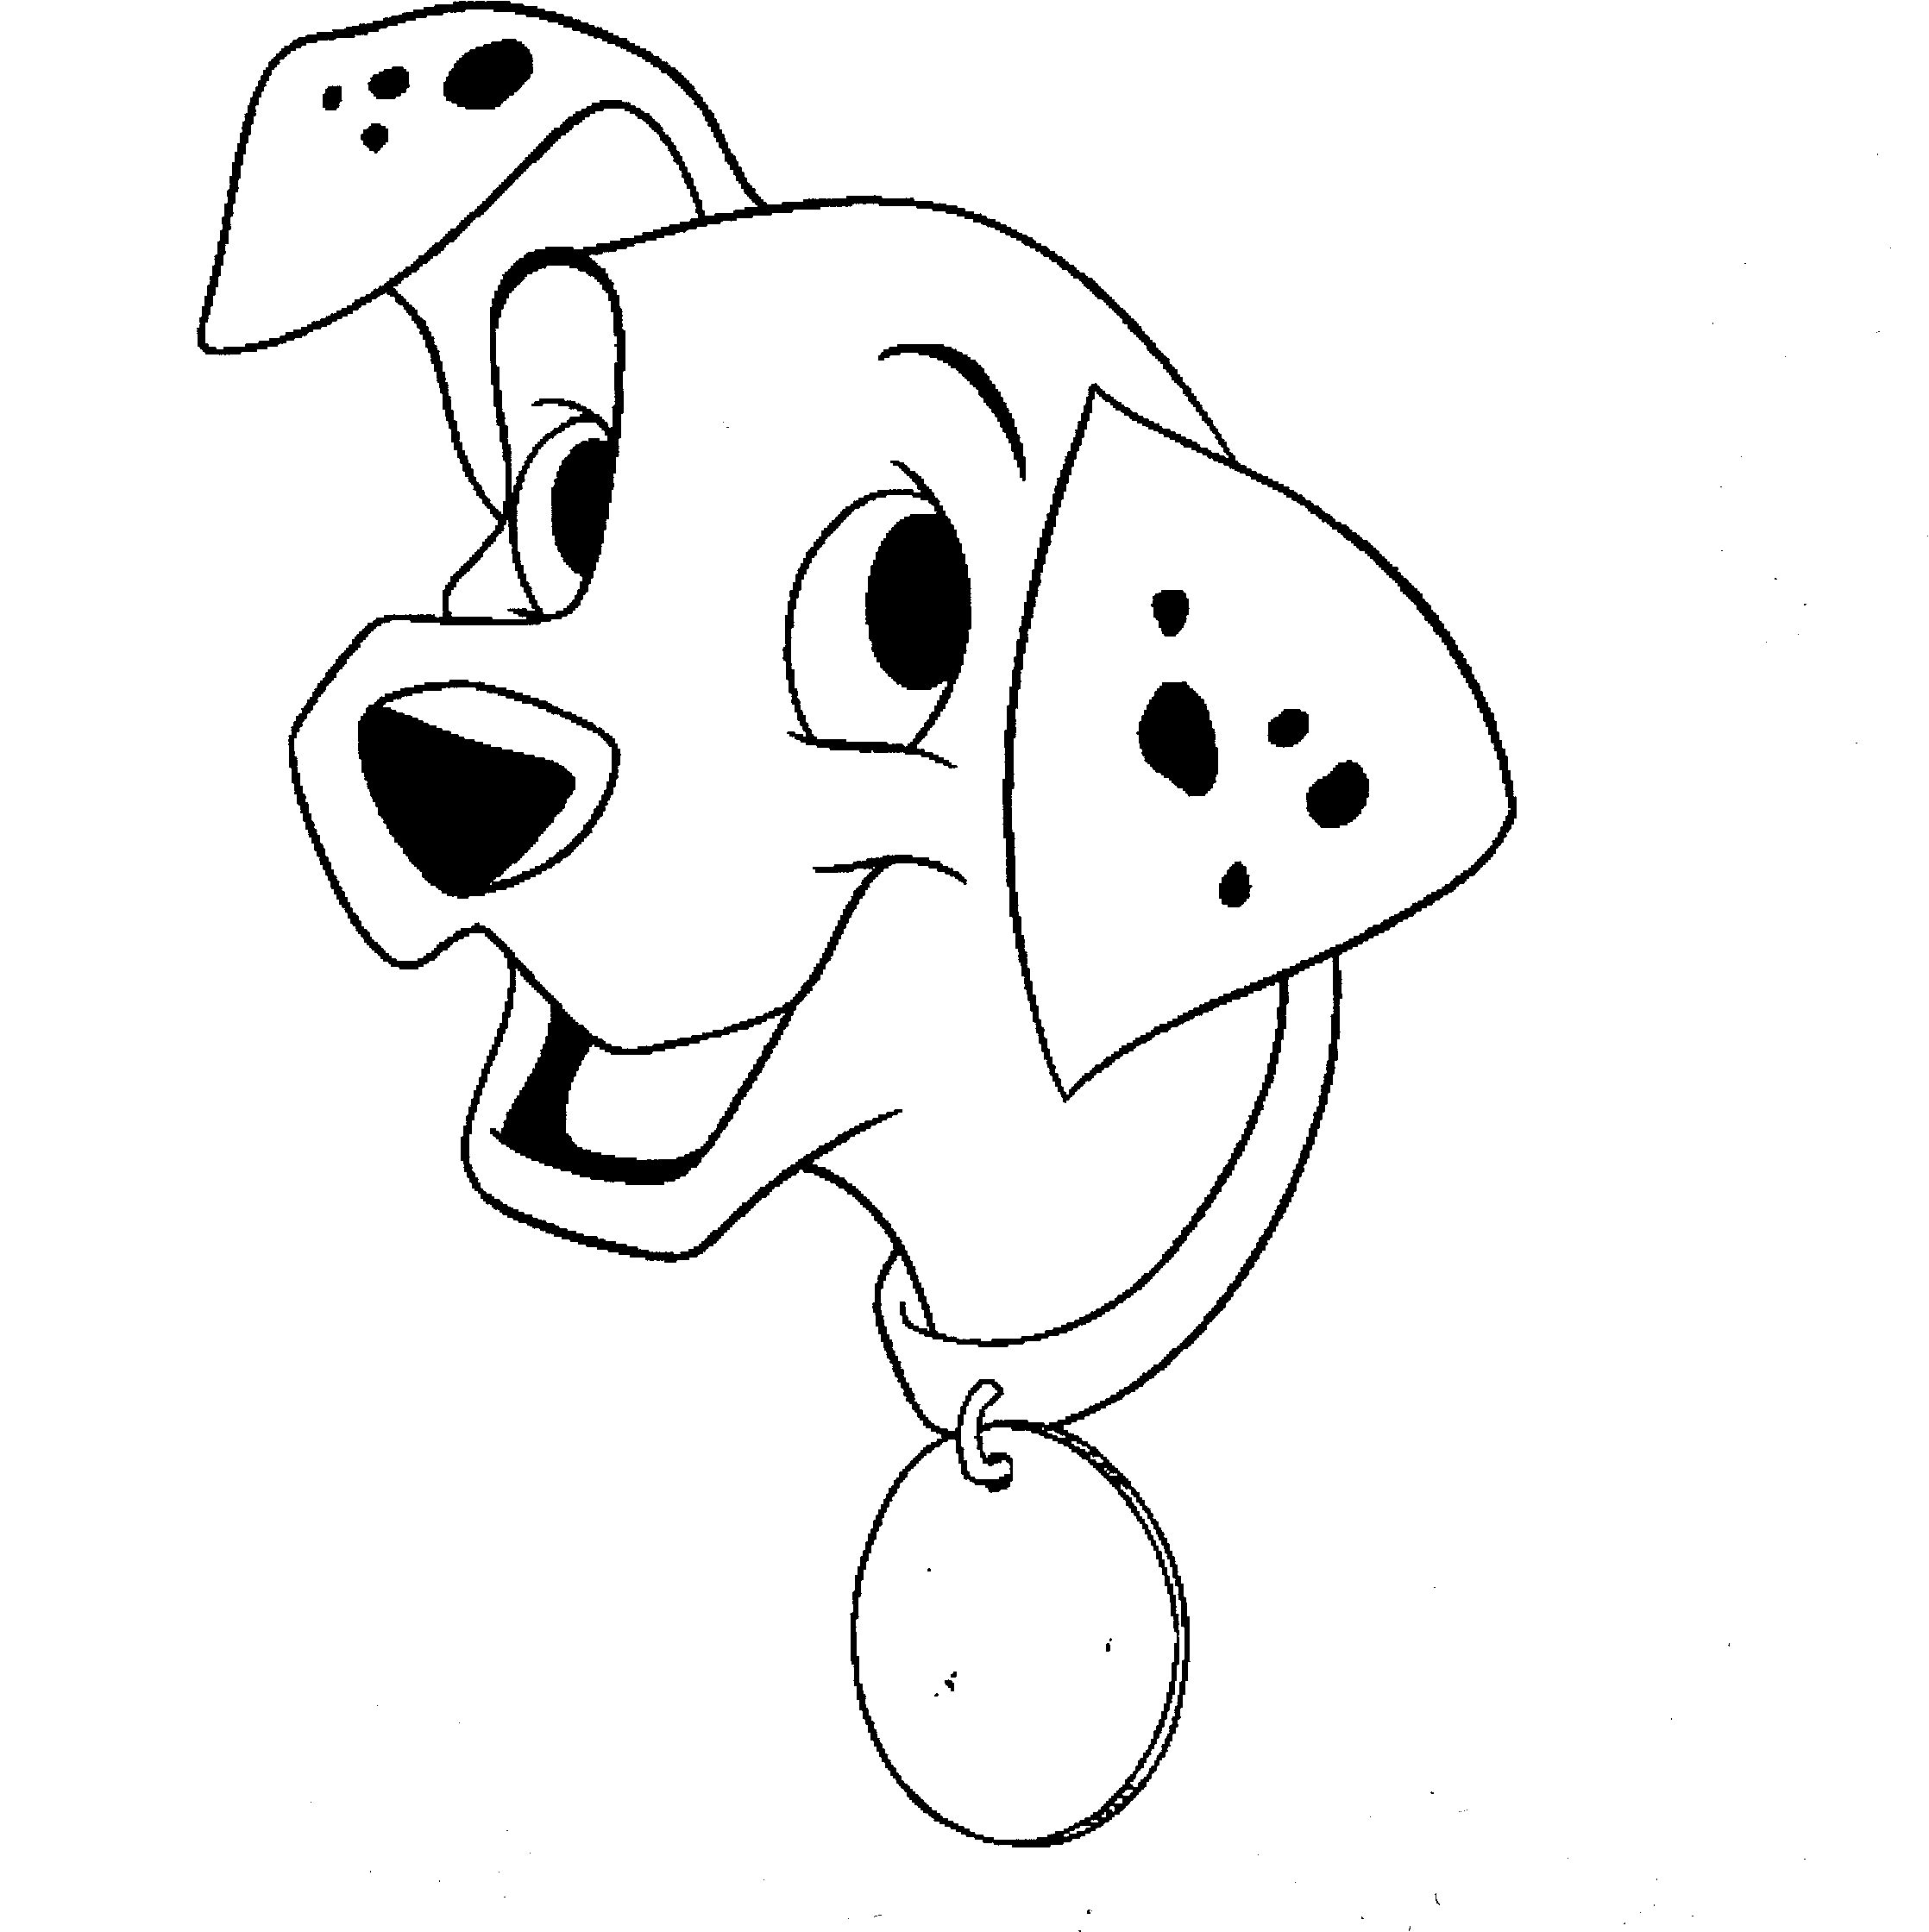 Cute Dalmatian Puppy Coloring Page | Animal pages of ...